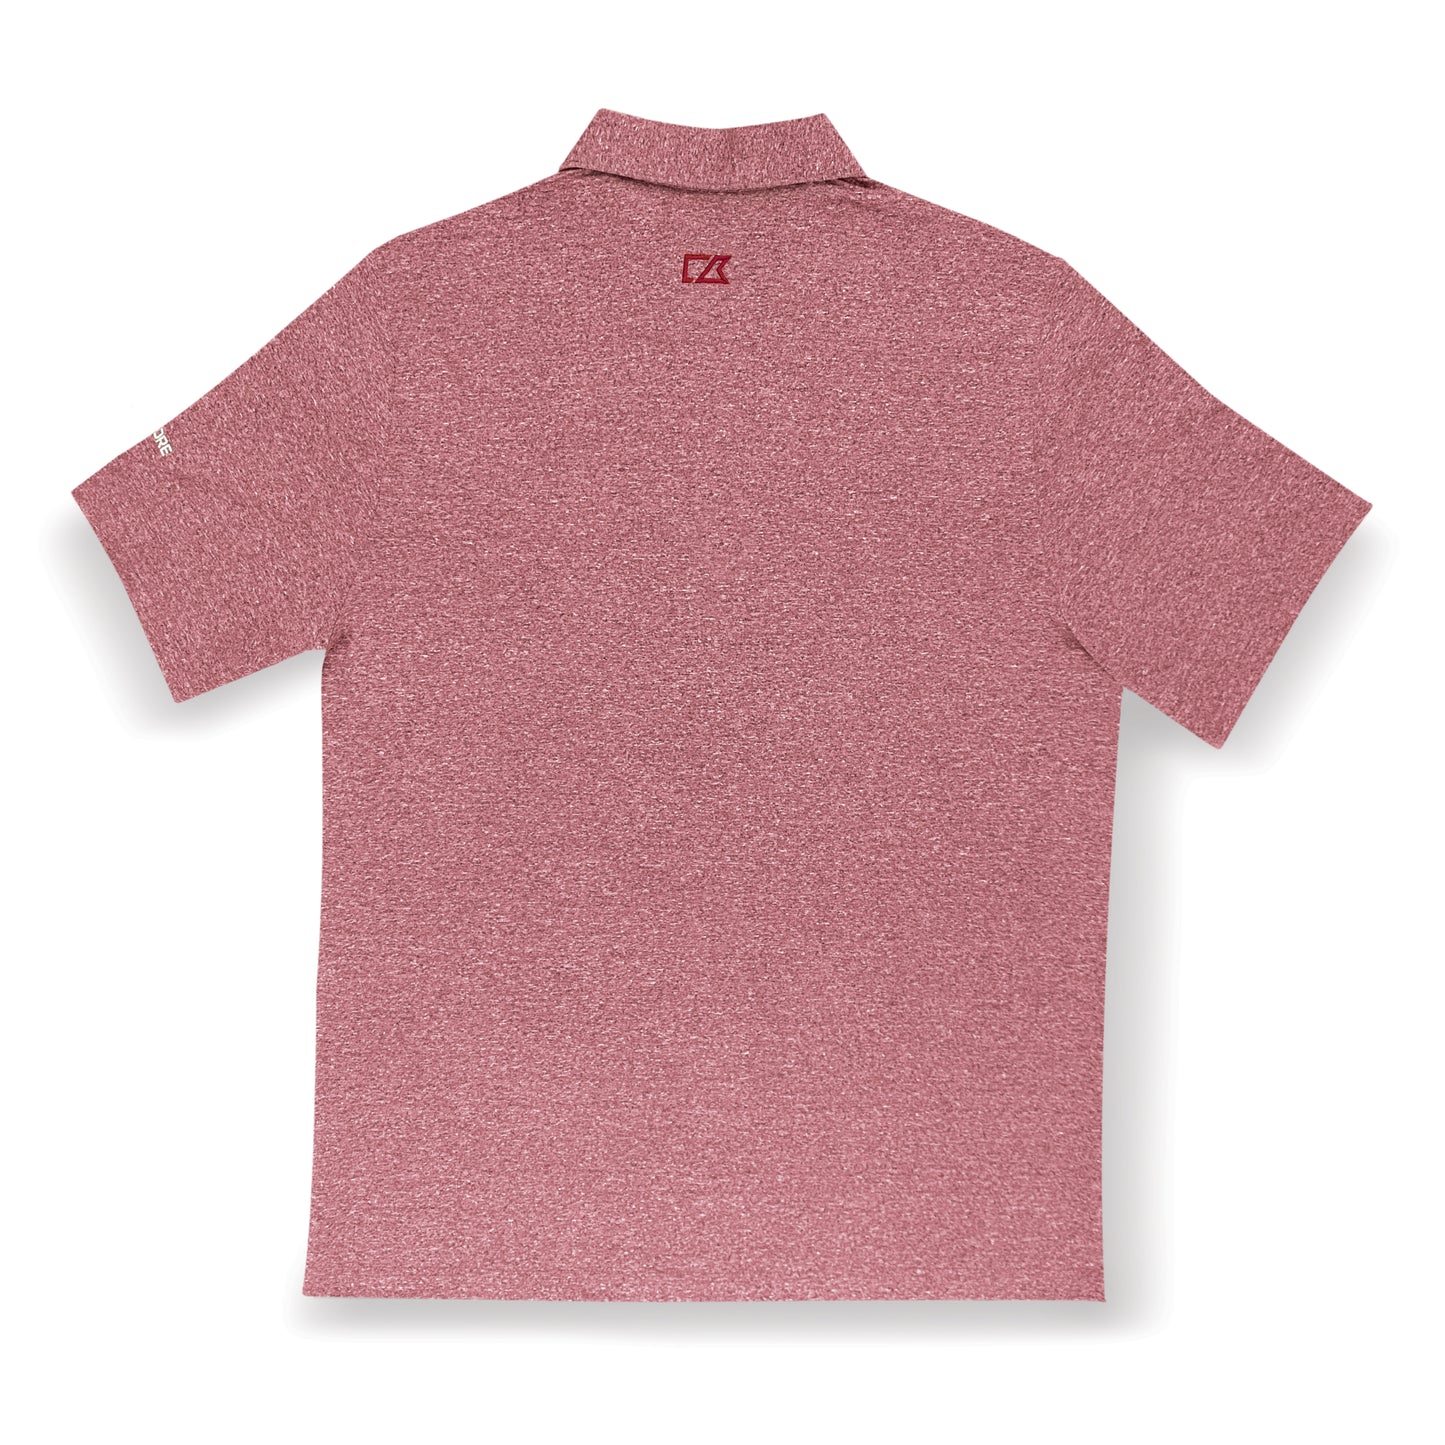 Cutter & Buck Forge Heathered Polo - Cardinal Red Heather